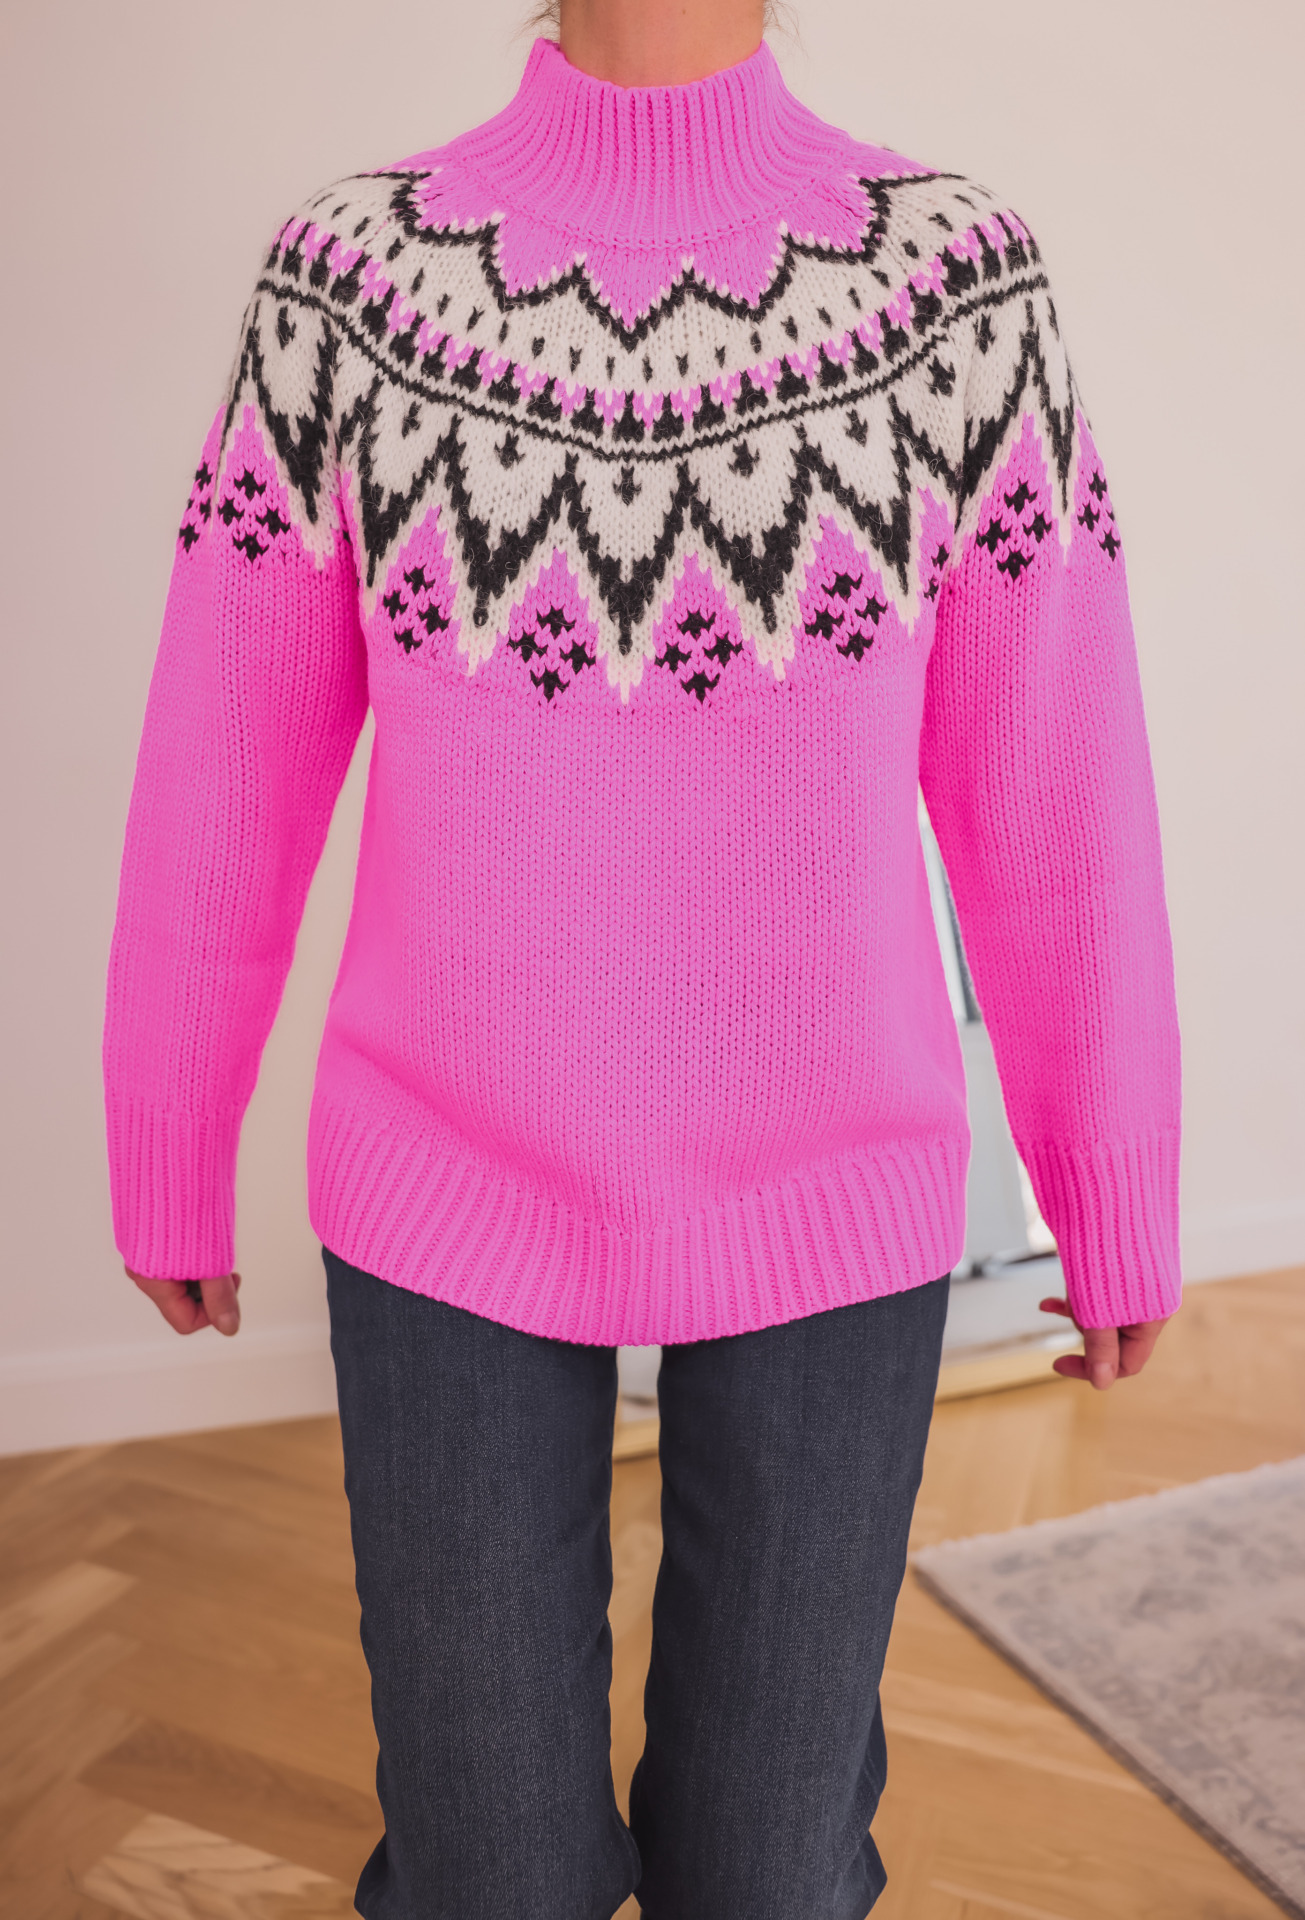 Fair Isle Sweaters Are Always In Style & These Are Our Favorites